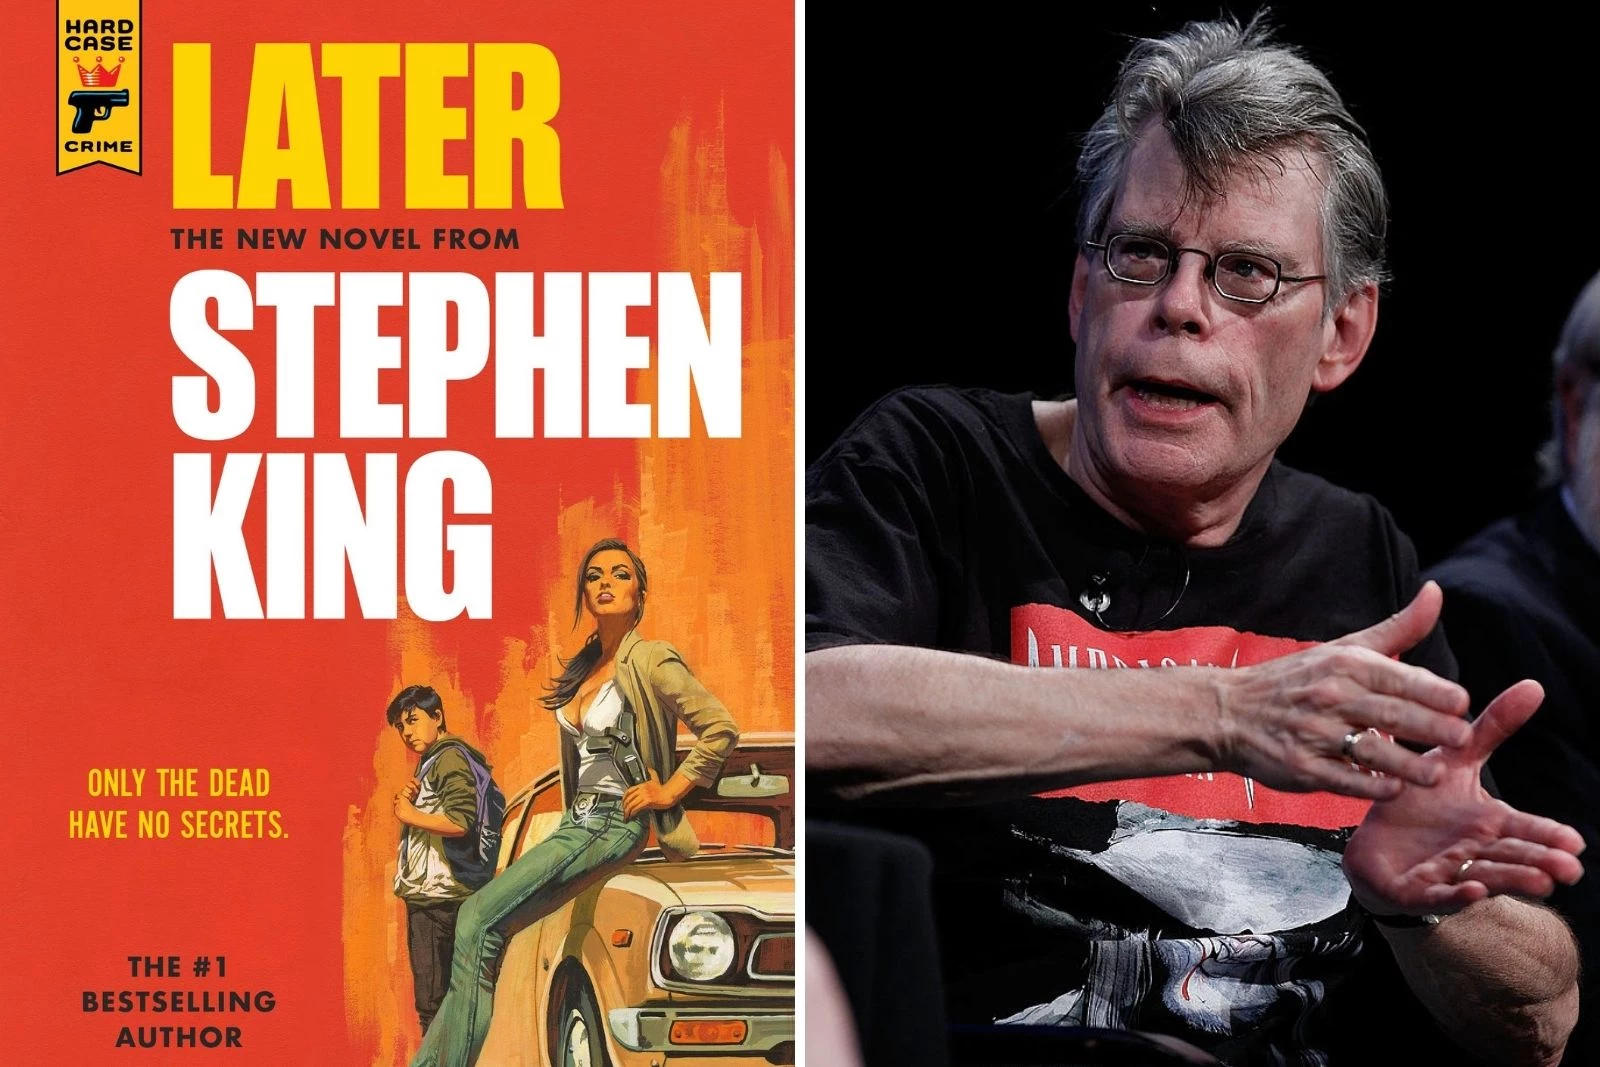 later book by stephen king